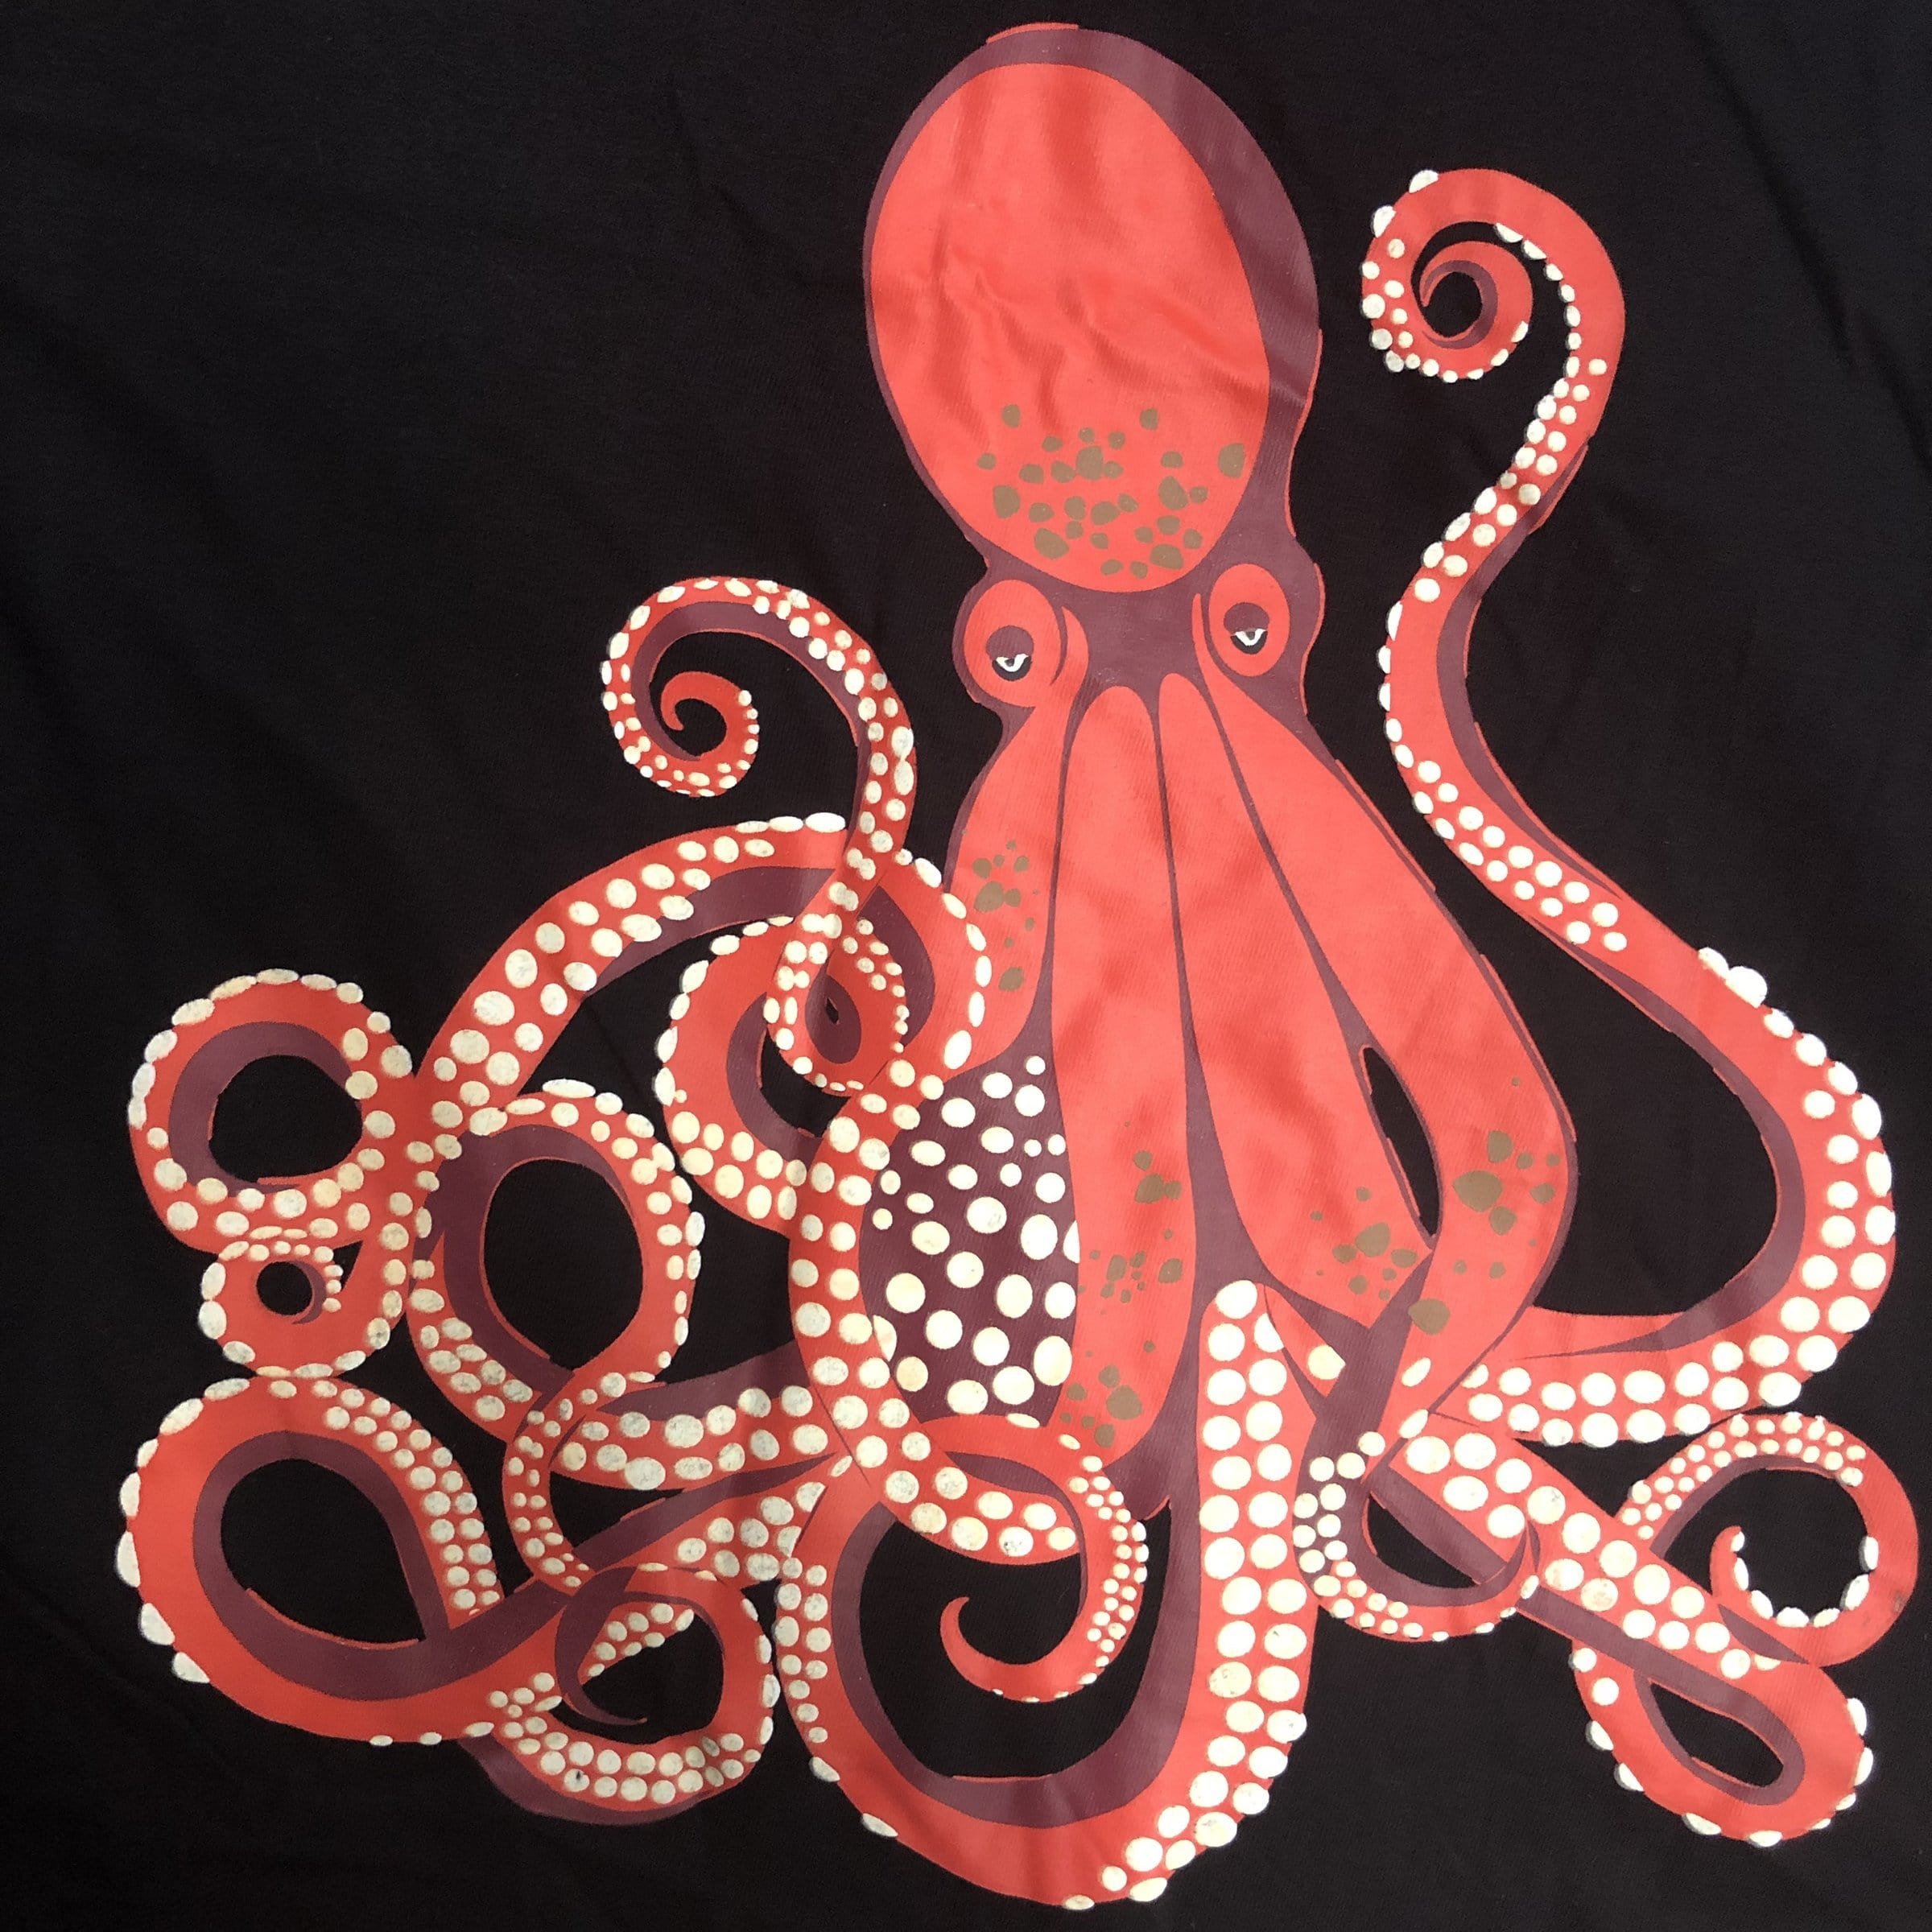 White-Spotted Octopus Glow-in-the-Dark Ruby Dress